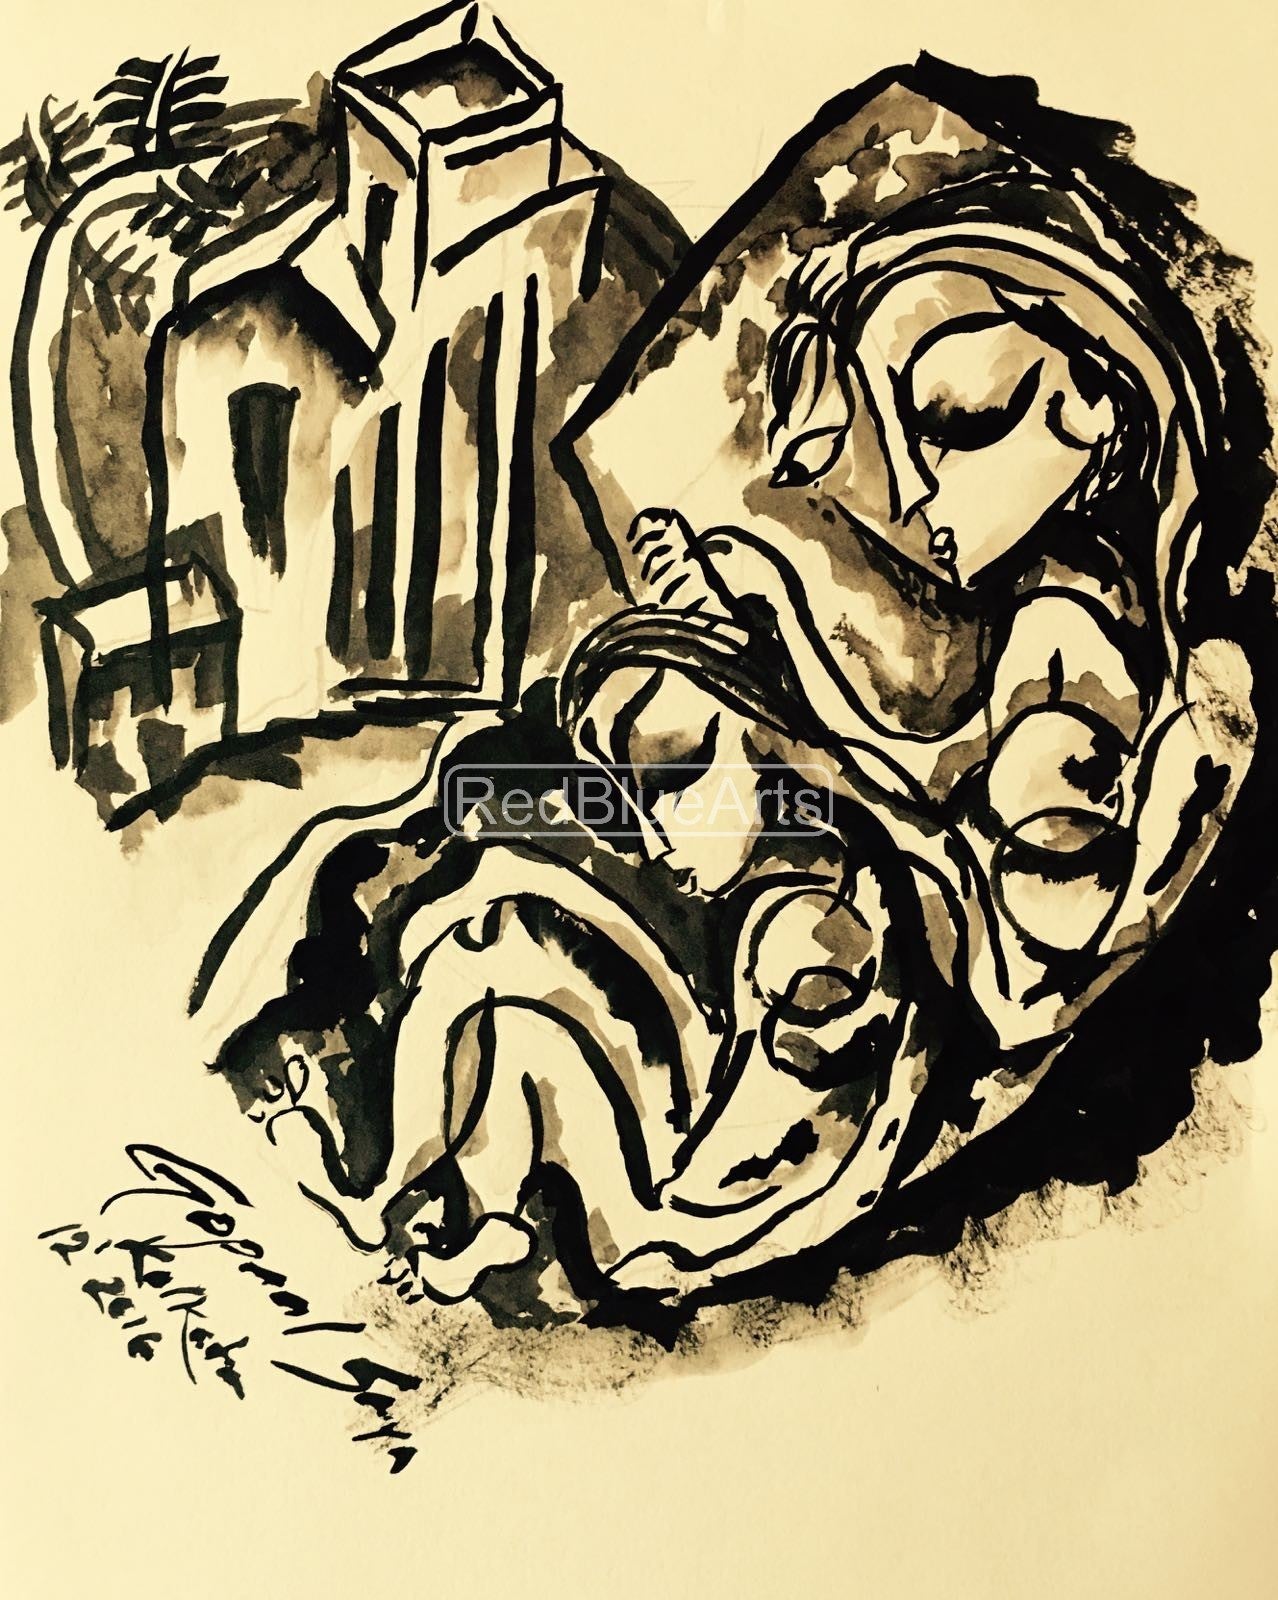 Contemporary Indian Art Houston | Charcoal Sketch | Gopaal Seyn